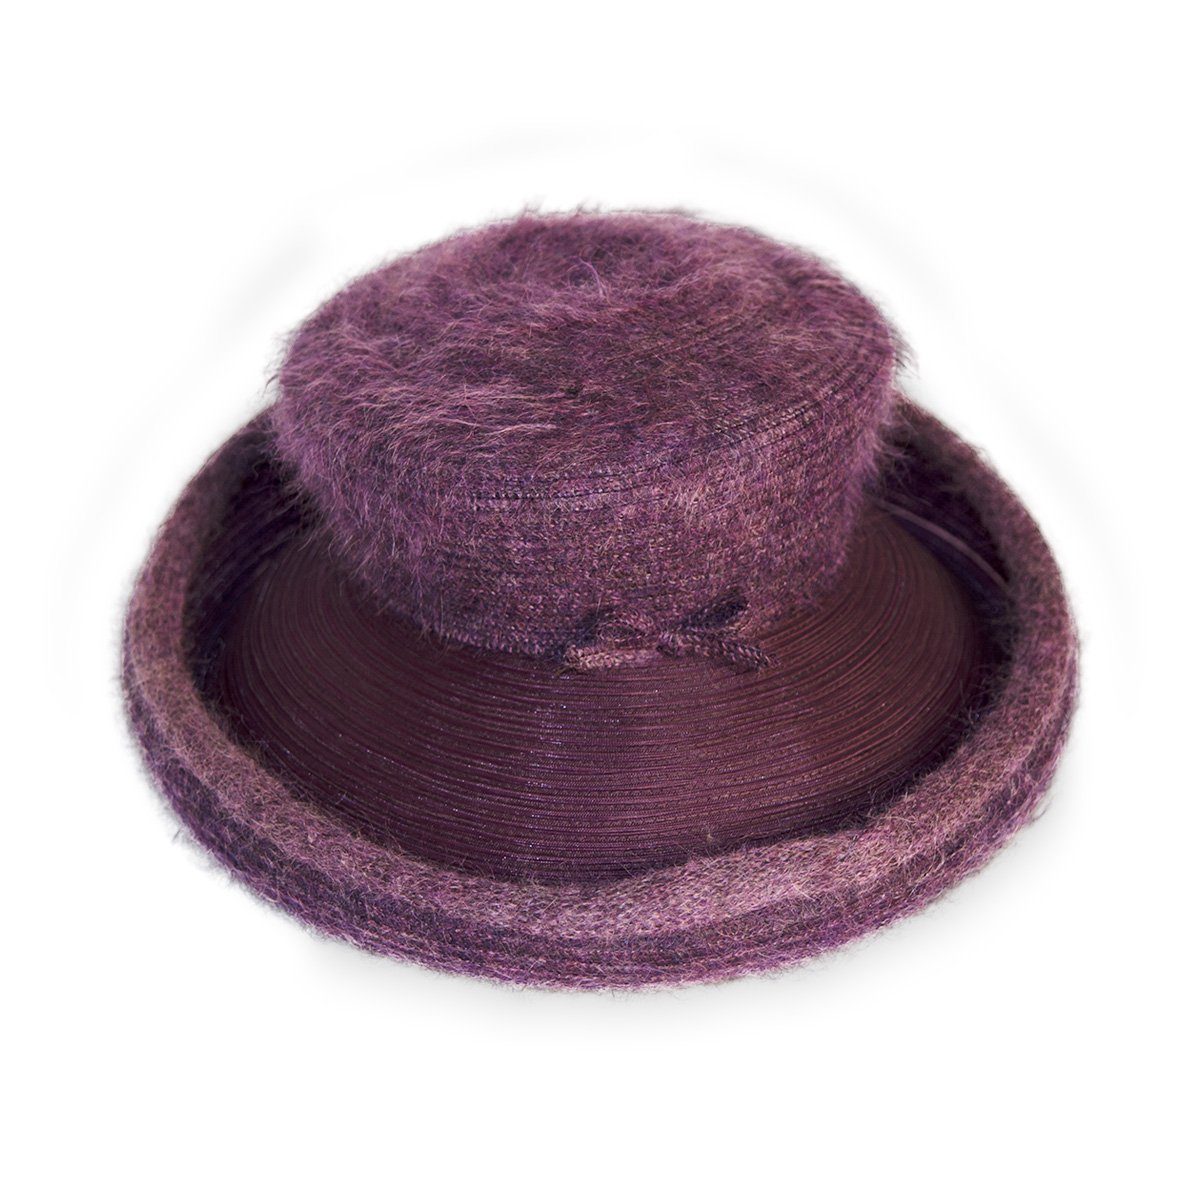 Gabriela Ligenza Purple Hat, Knit & Horsehair, Made in Italy by Marzi Brothers